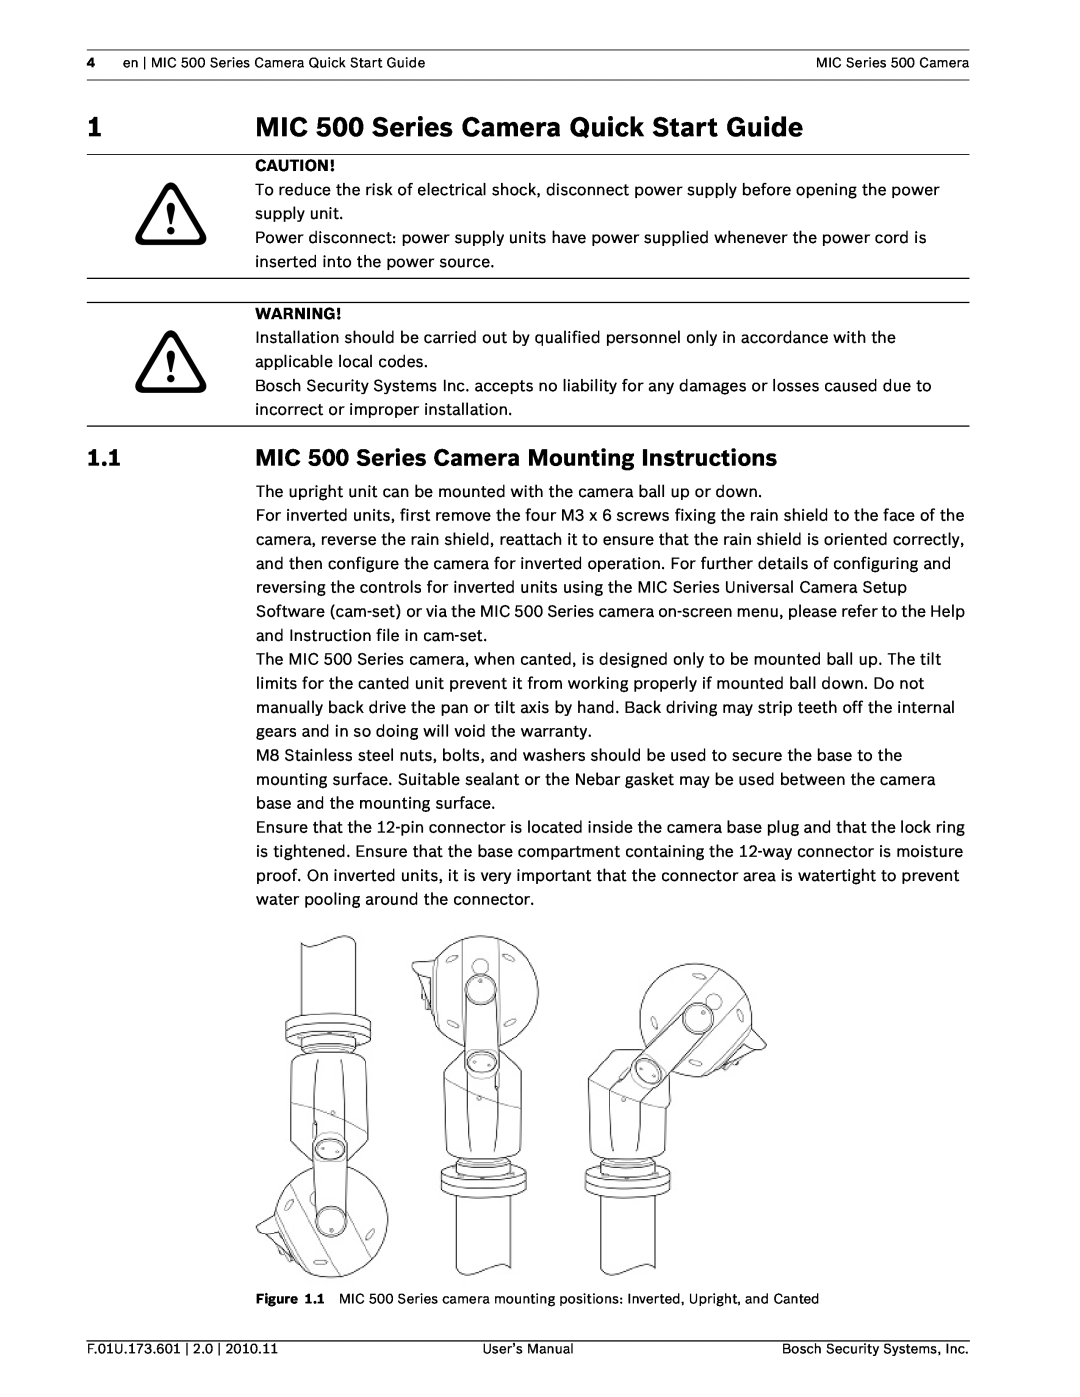 Bosch Appliances manual MIC 500 Series Camera Quick Start Guide, MIC 500 Series Camera Mounting Instructions 